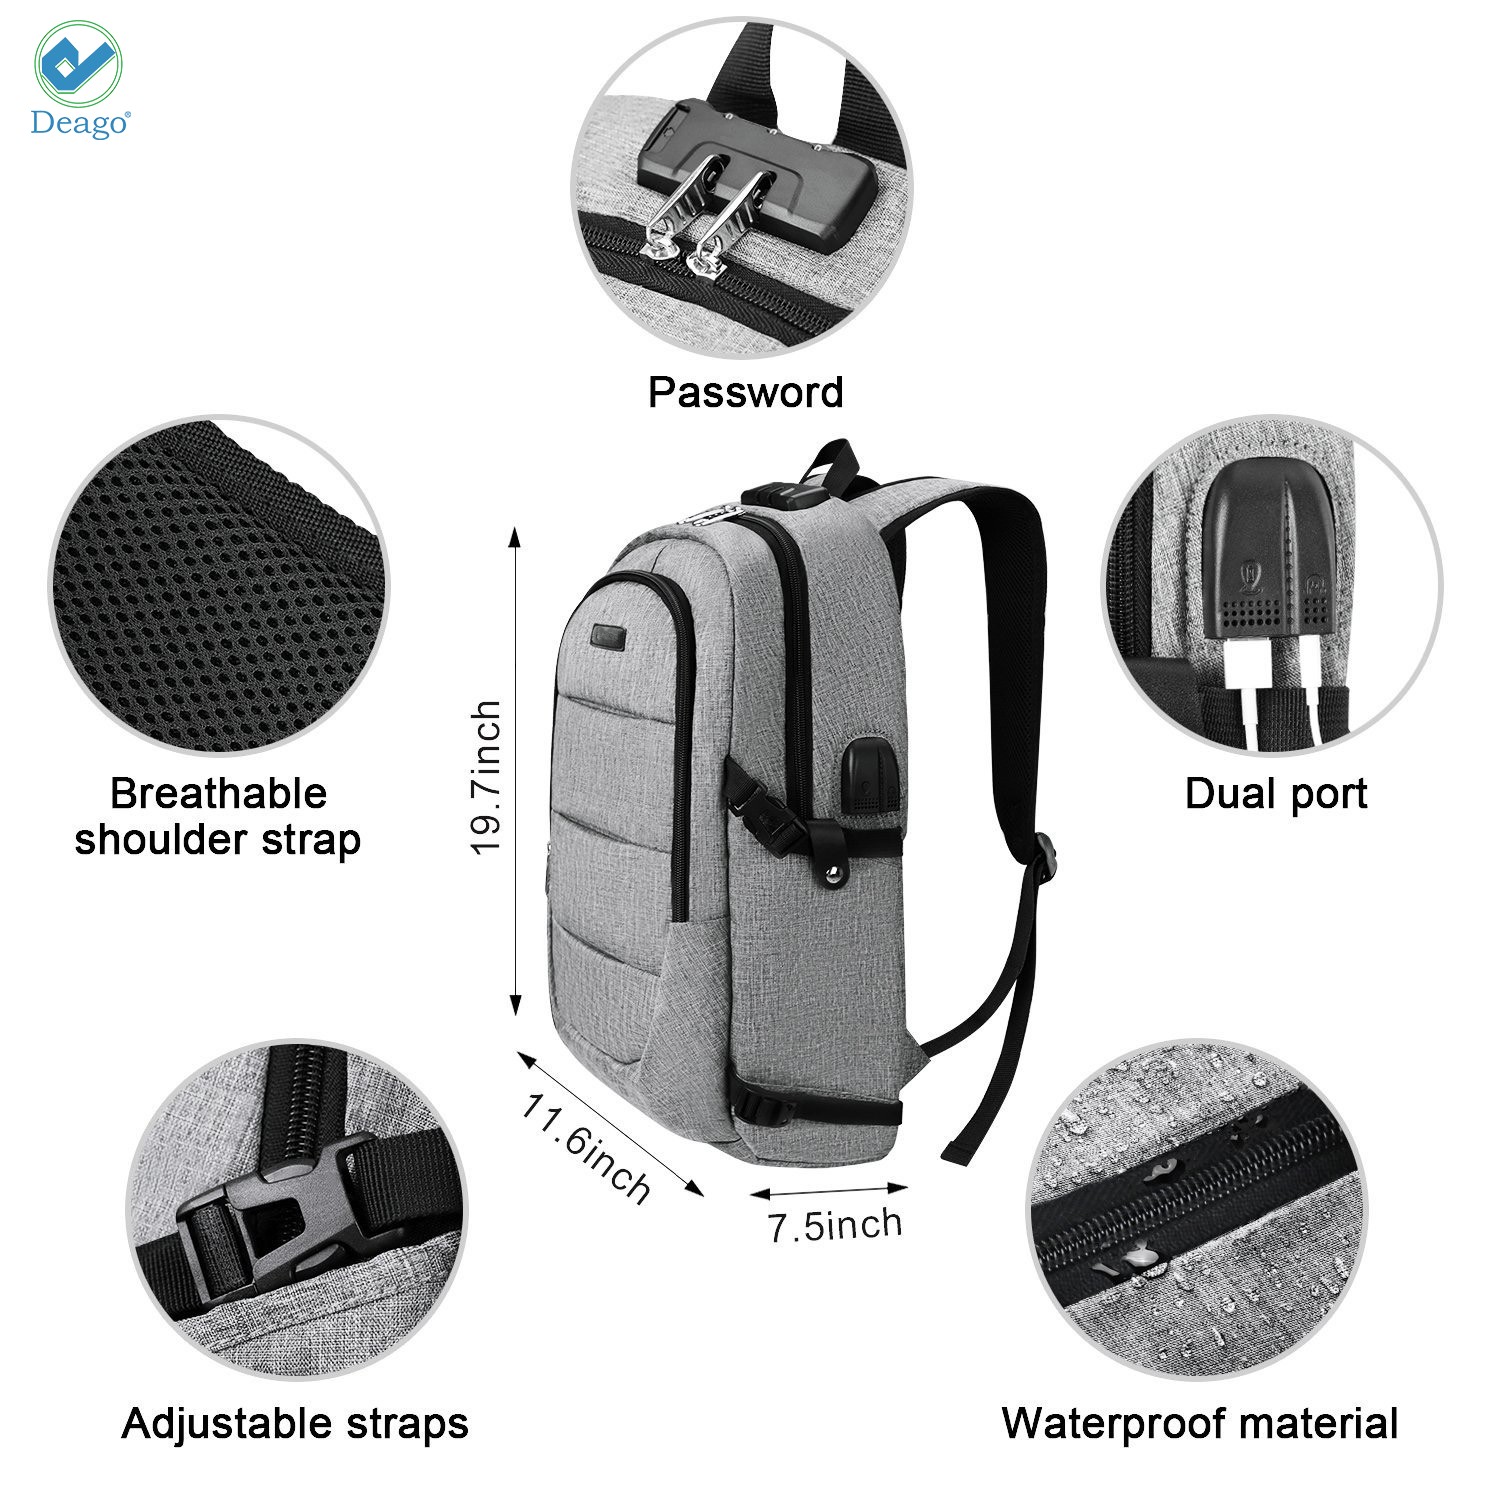 Deago Laptop Backpack, Business Anti Theft with lock Waterproof Travel Backpack with USB Charging Port for Laptops up to 17 inches (Gray) - image 4 of 9